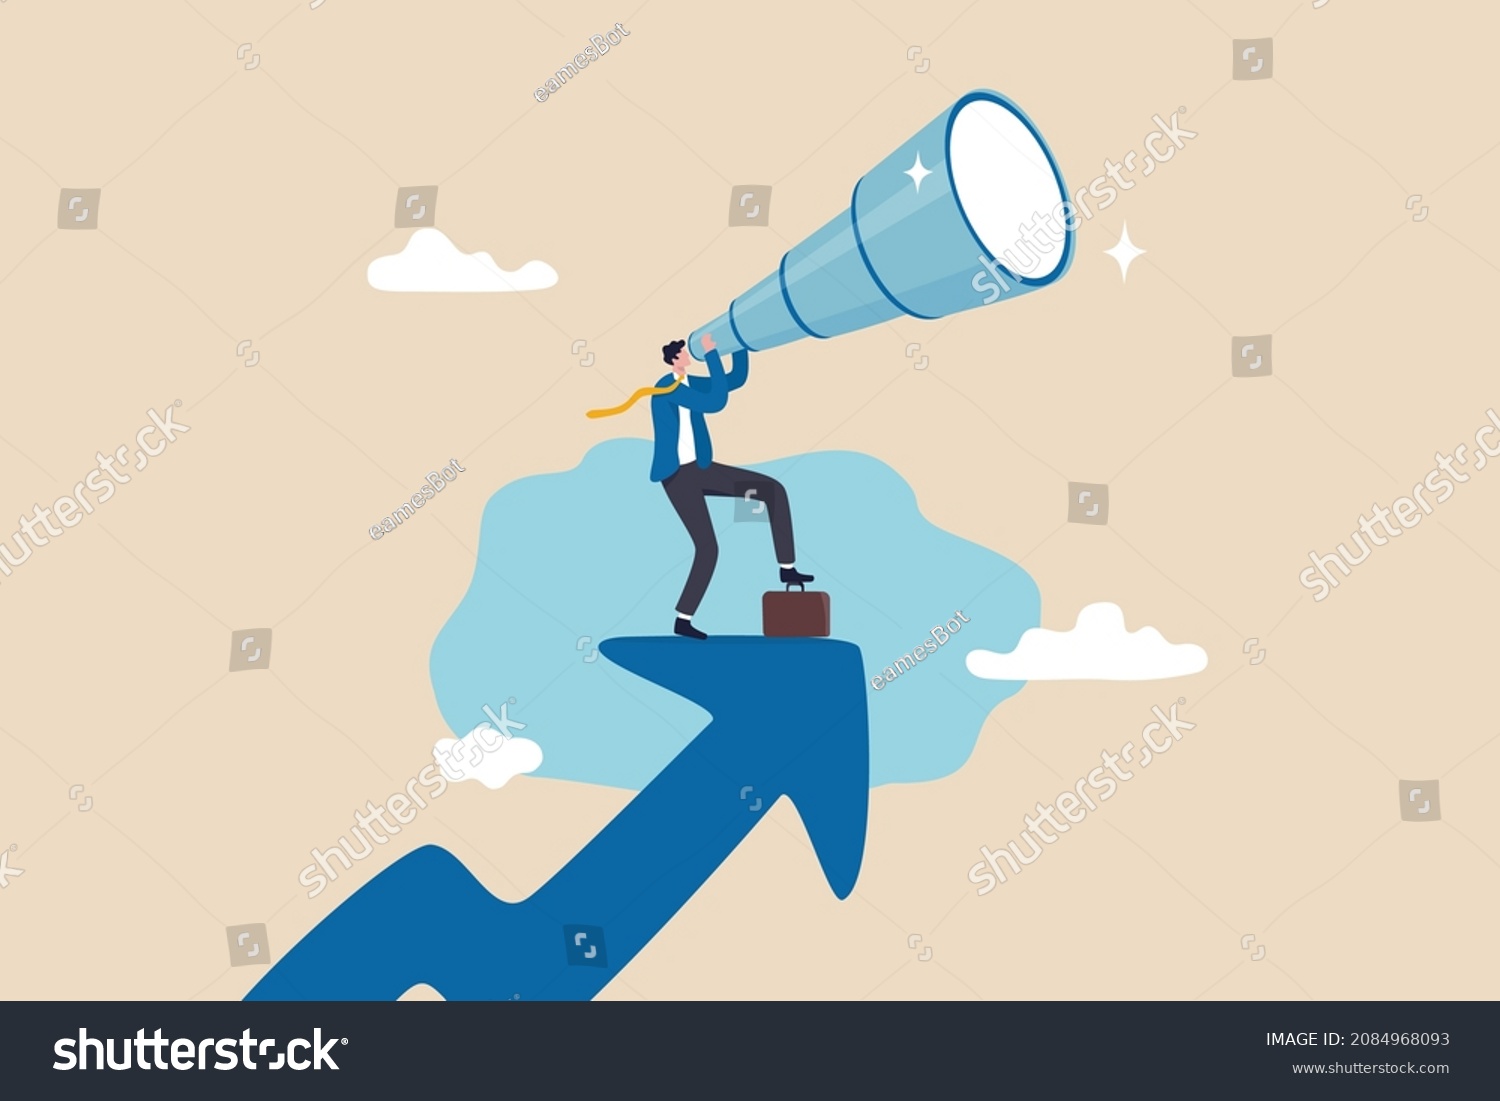 SVG of Business opportunity or investment and market prediction, future growth or career development vision, profit and earning forecast concept, businessman climb up rising arrow with big telescope spyglass svg